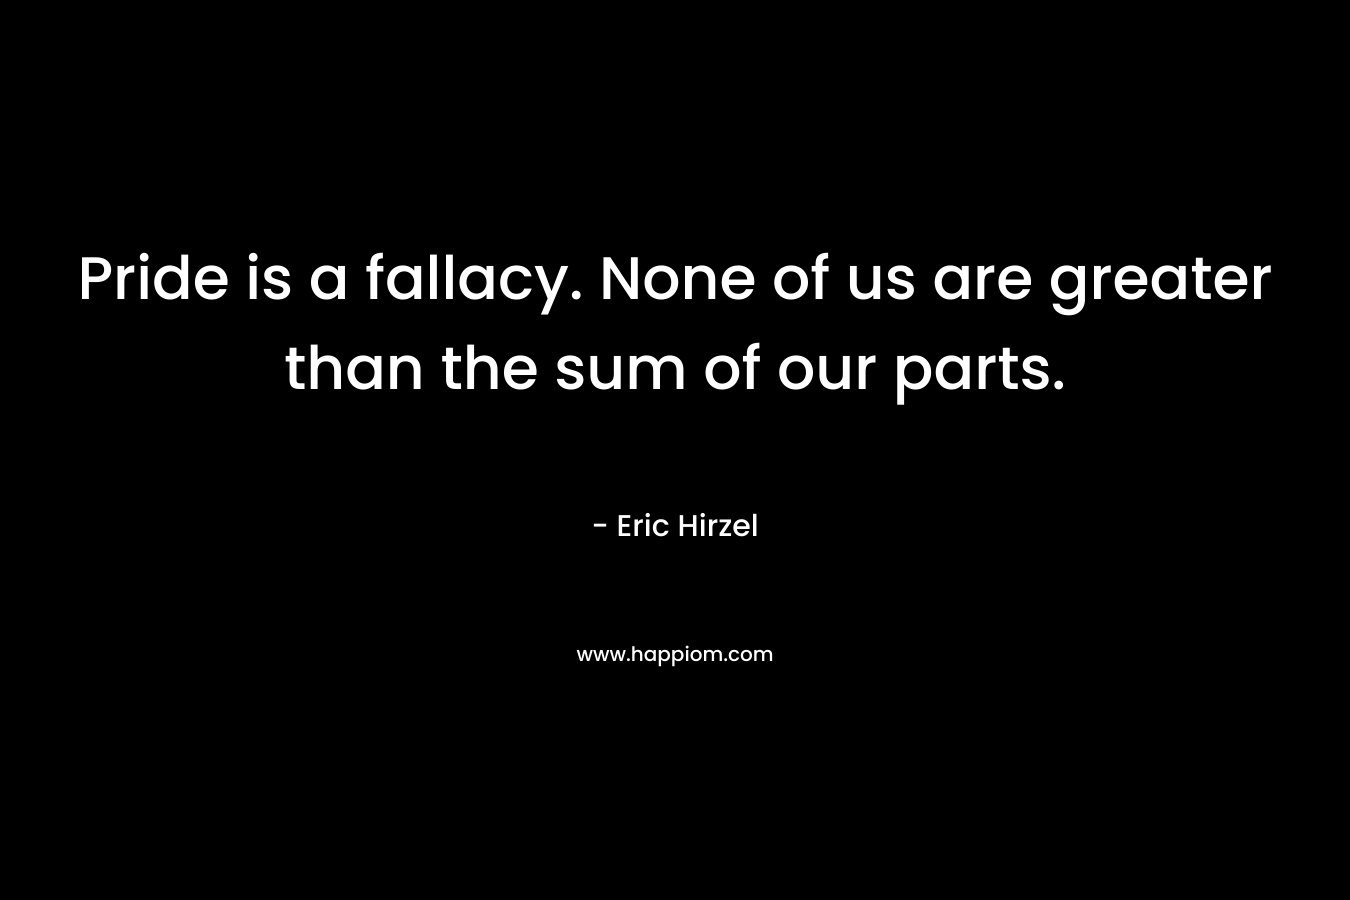 Pride is a fallacy. None of us are greater than the sum of our parts.